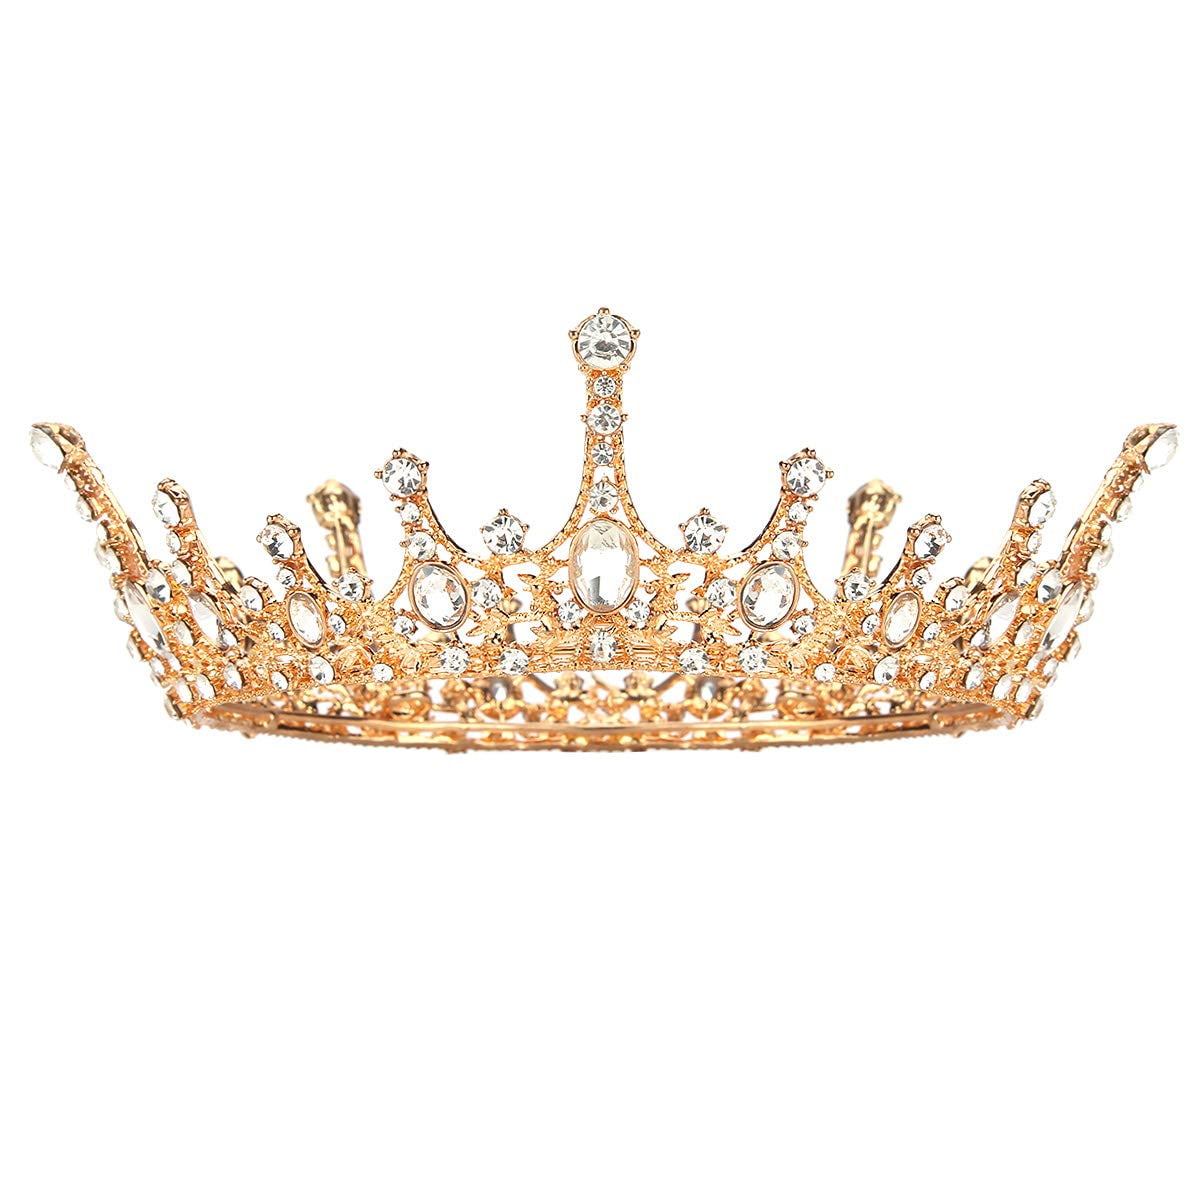 Beauty Pageant 5.5" Women Tiara Crown Rhinestone Hair Jewelry Party Costumes New 